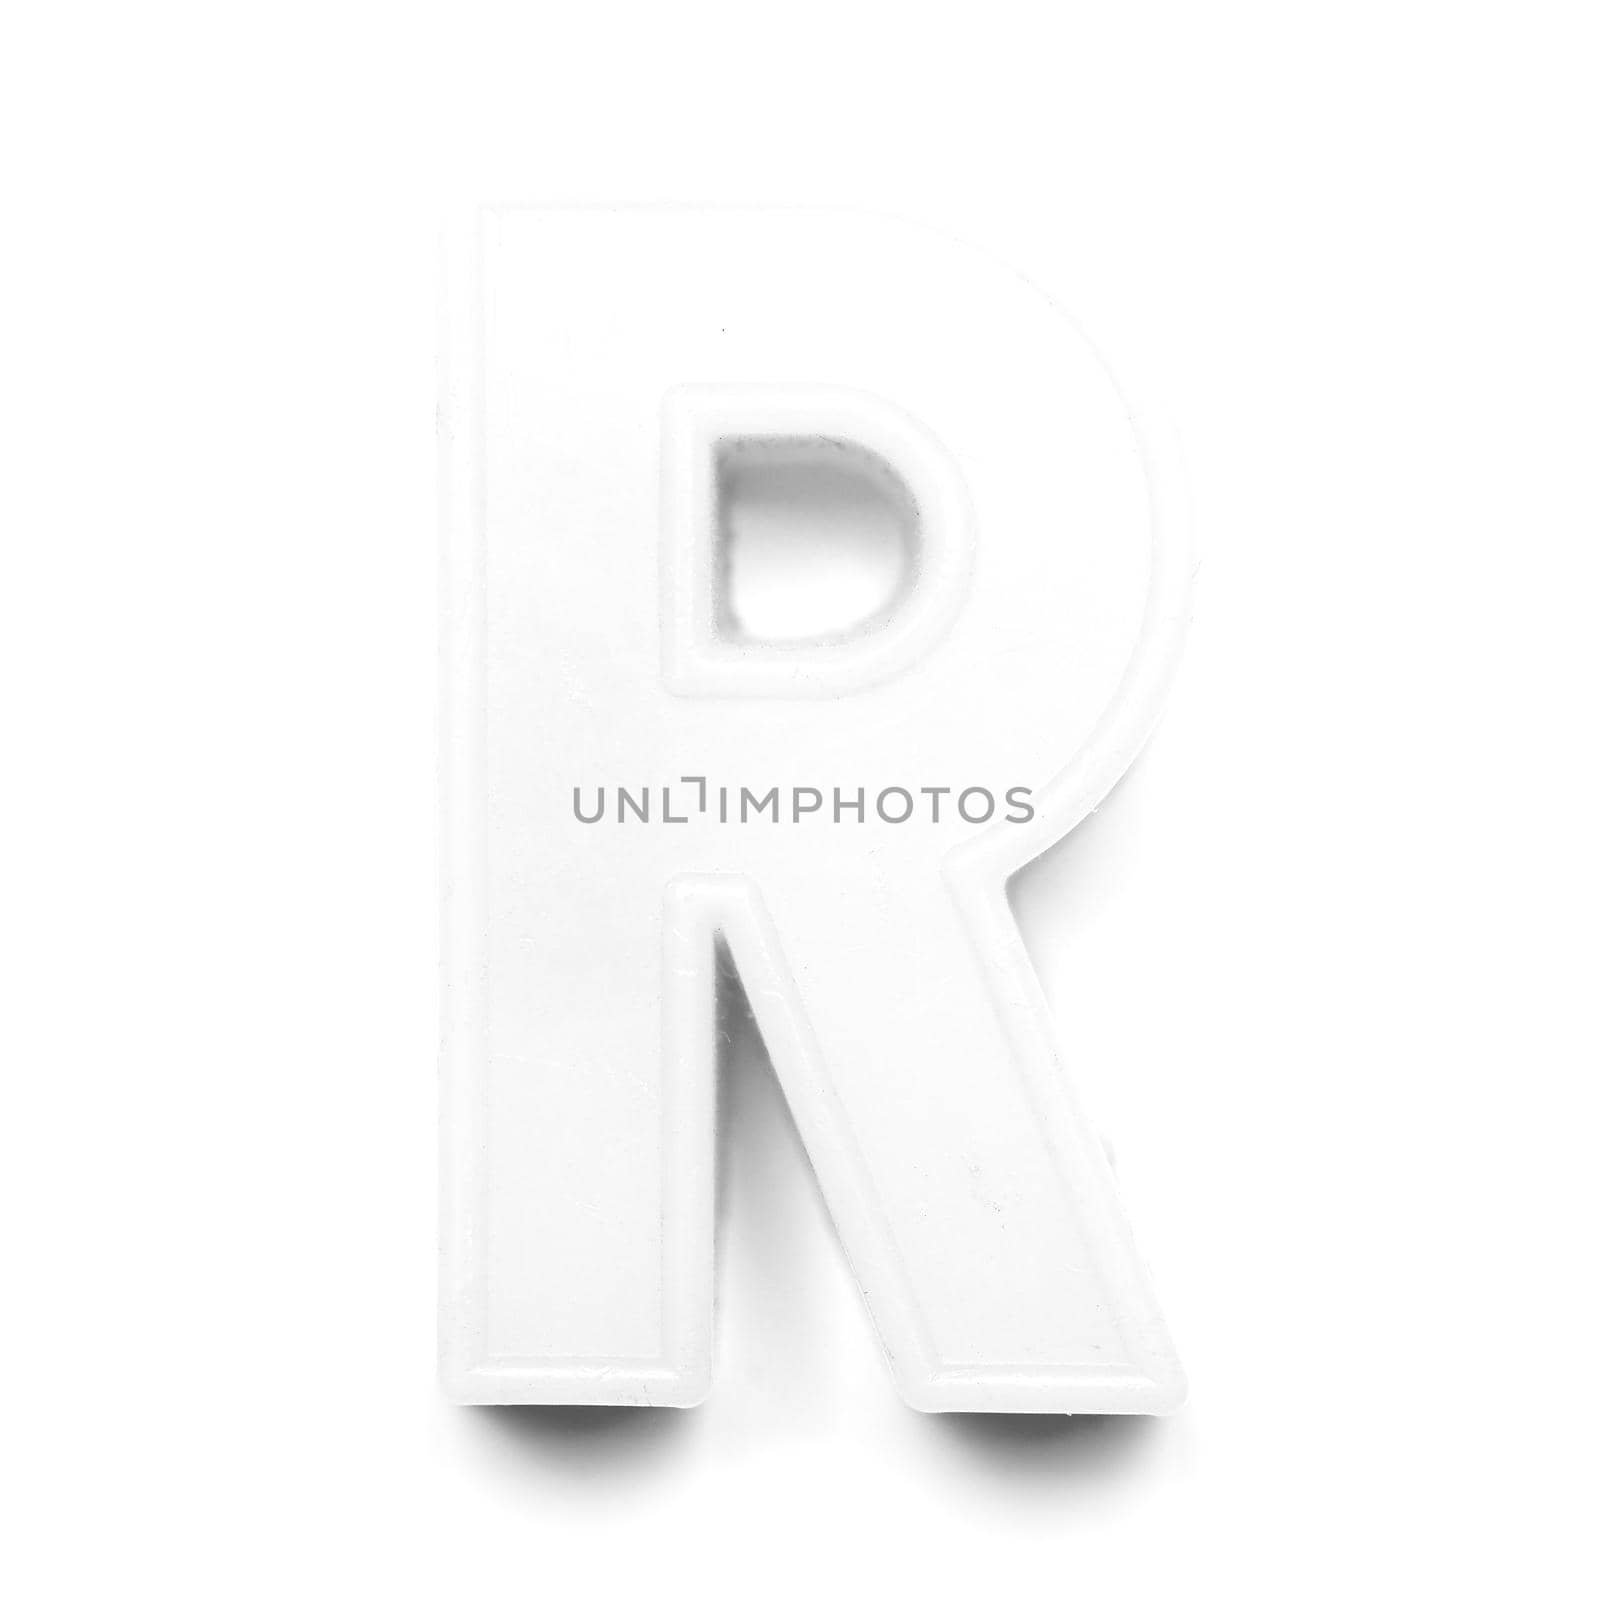 Magnetic uppercase letter R in black and white by claudiodivizia